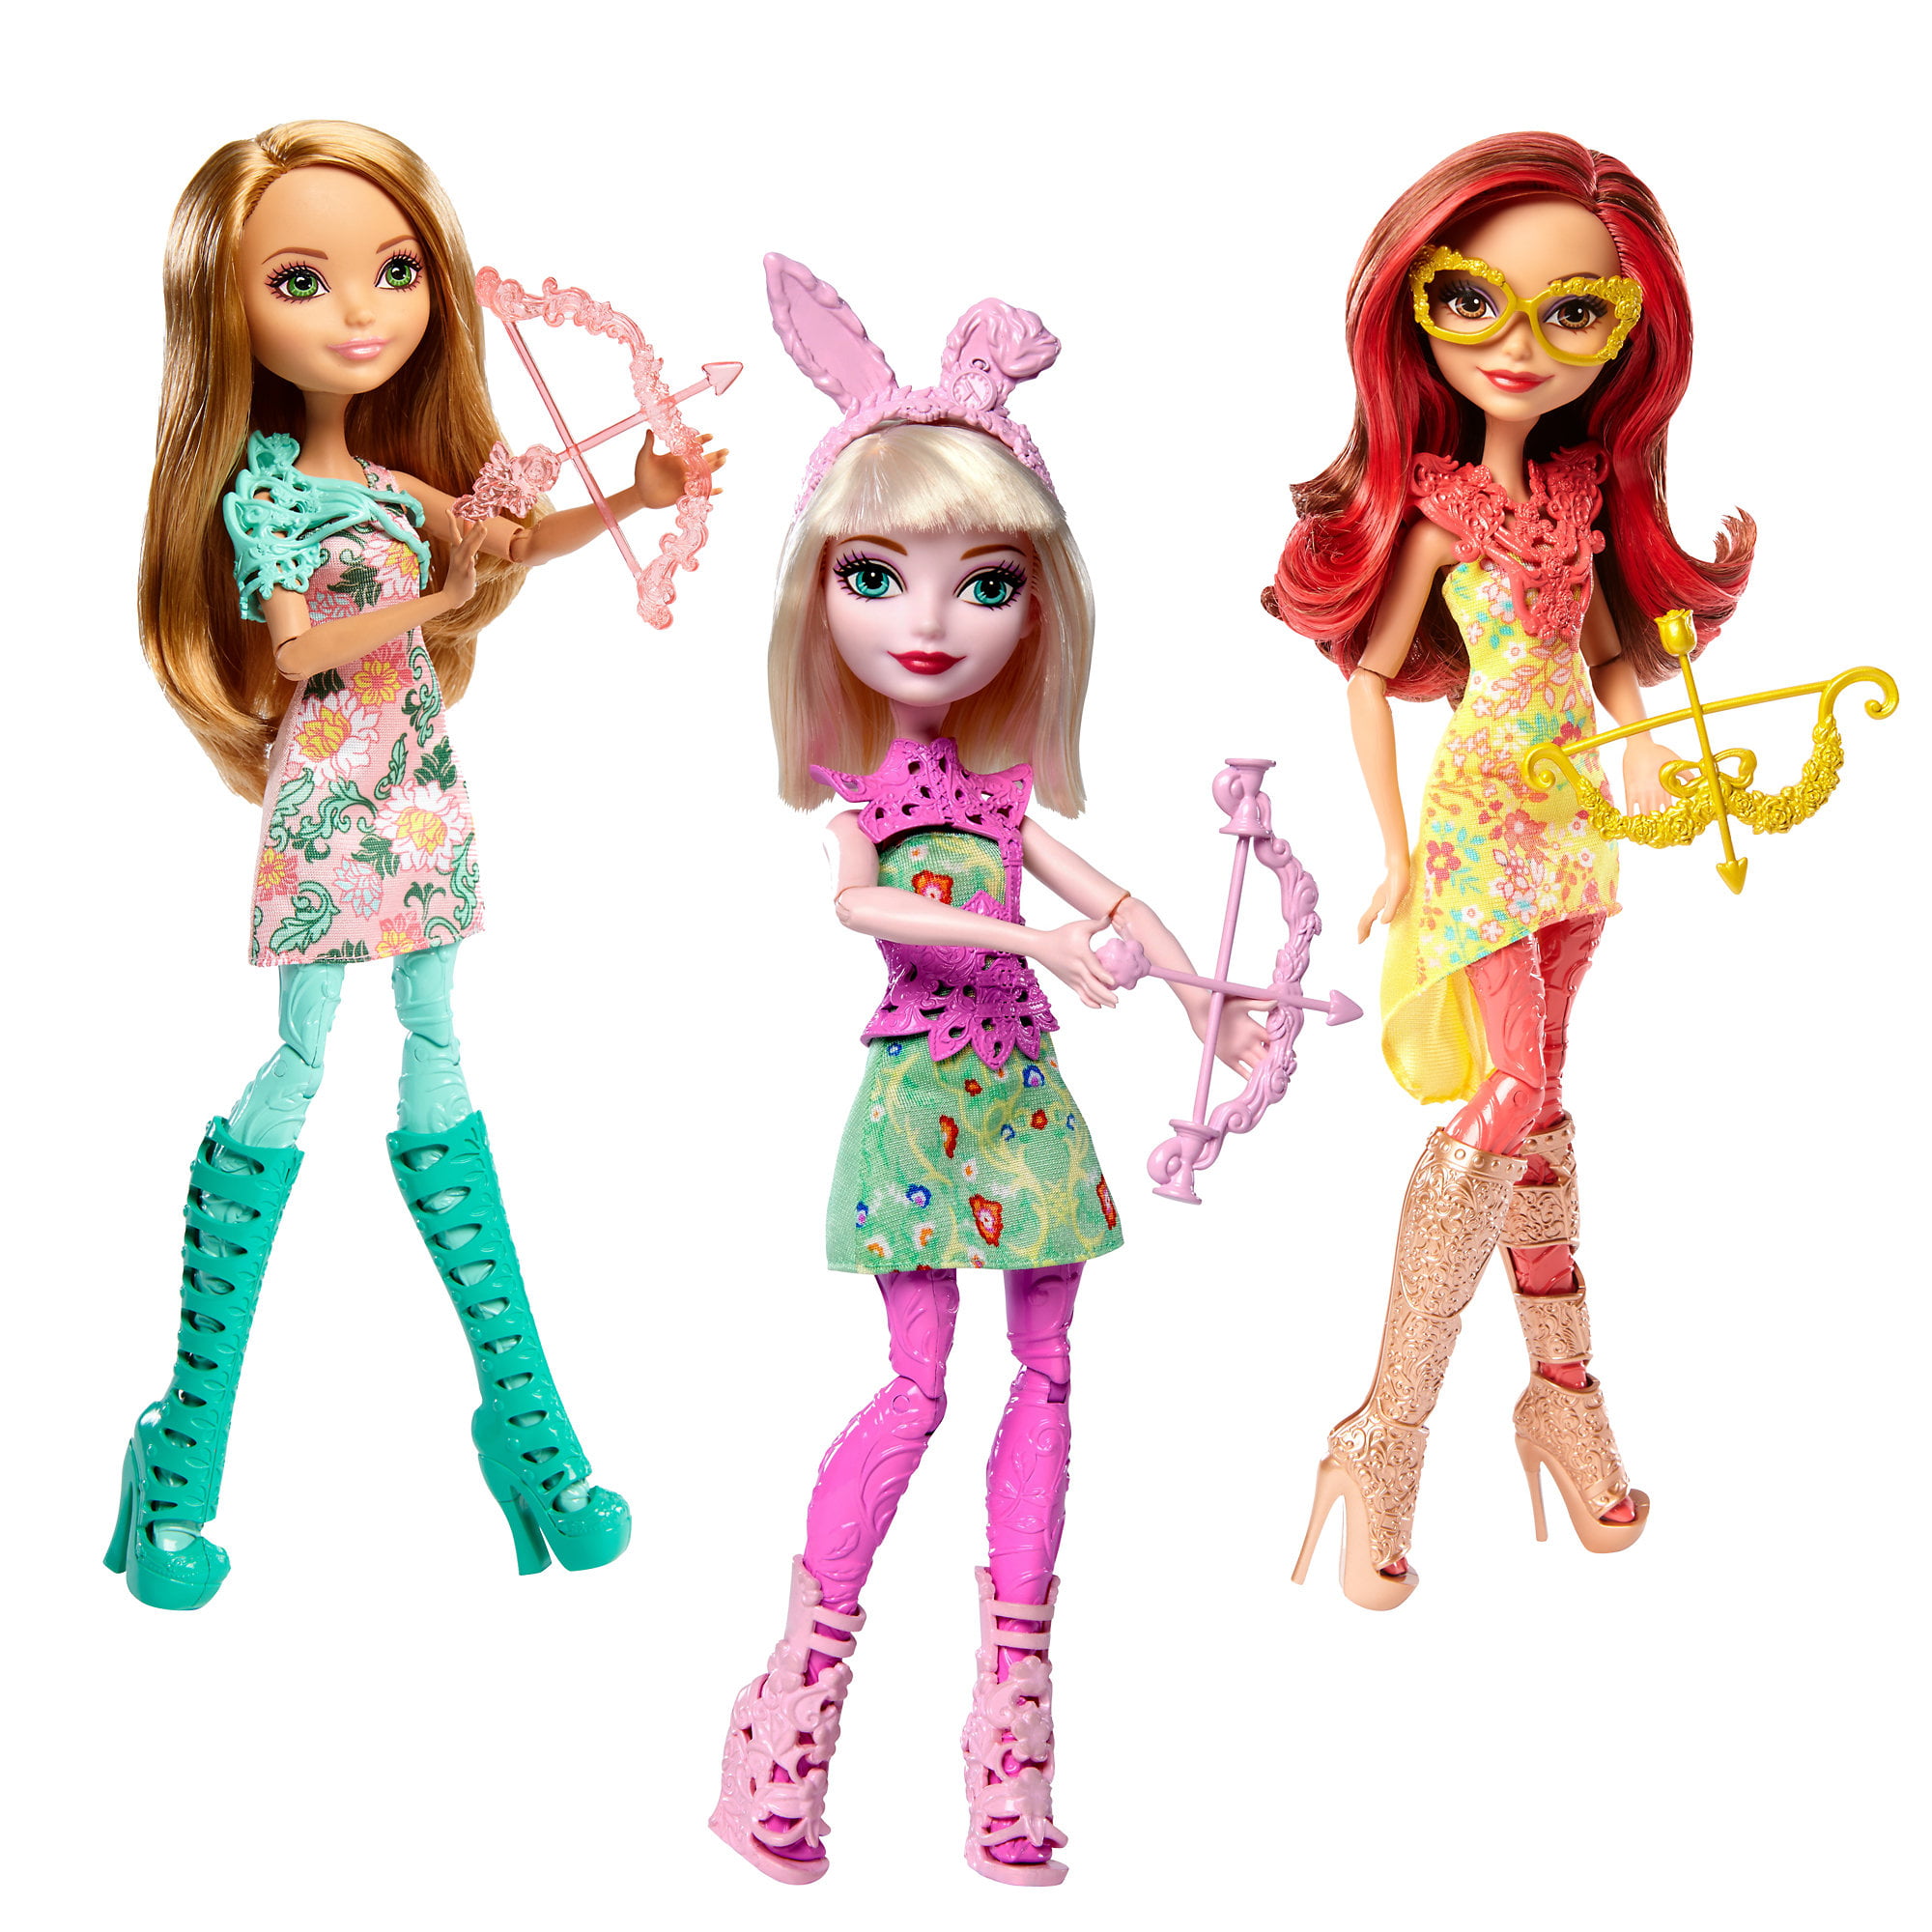 ever after high dolls